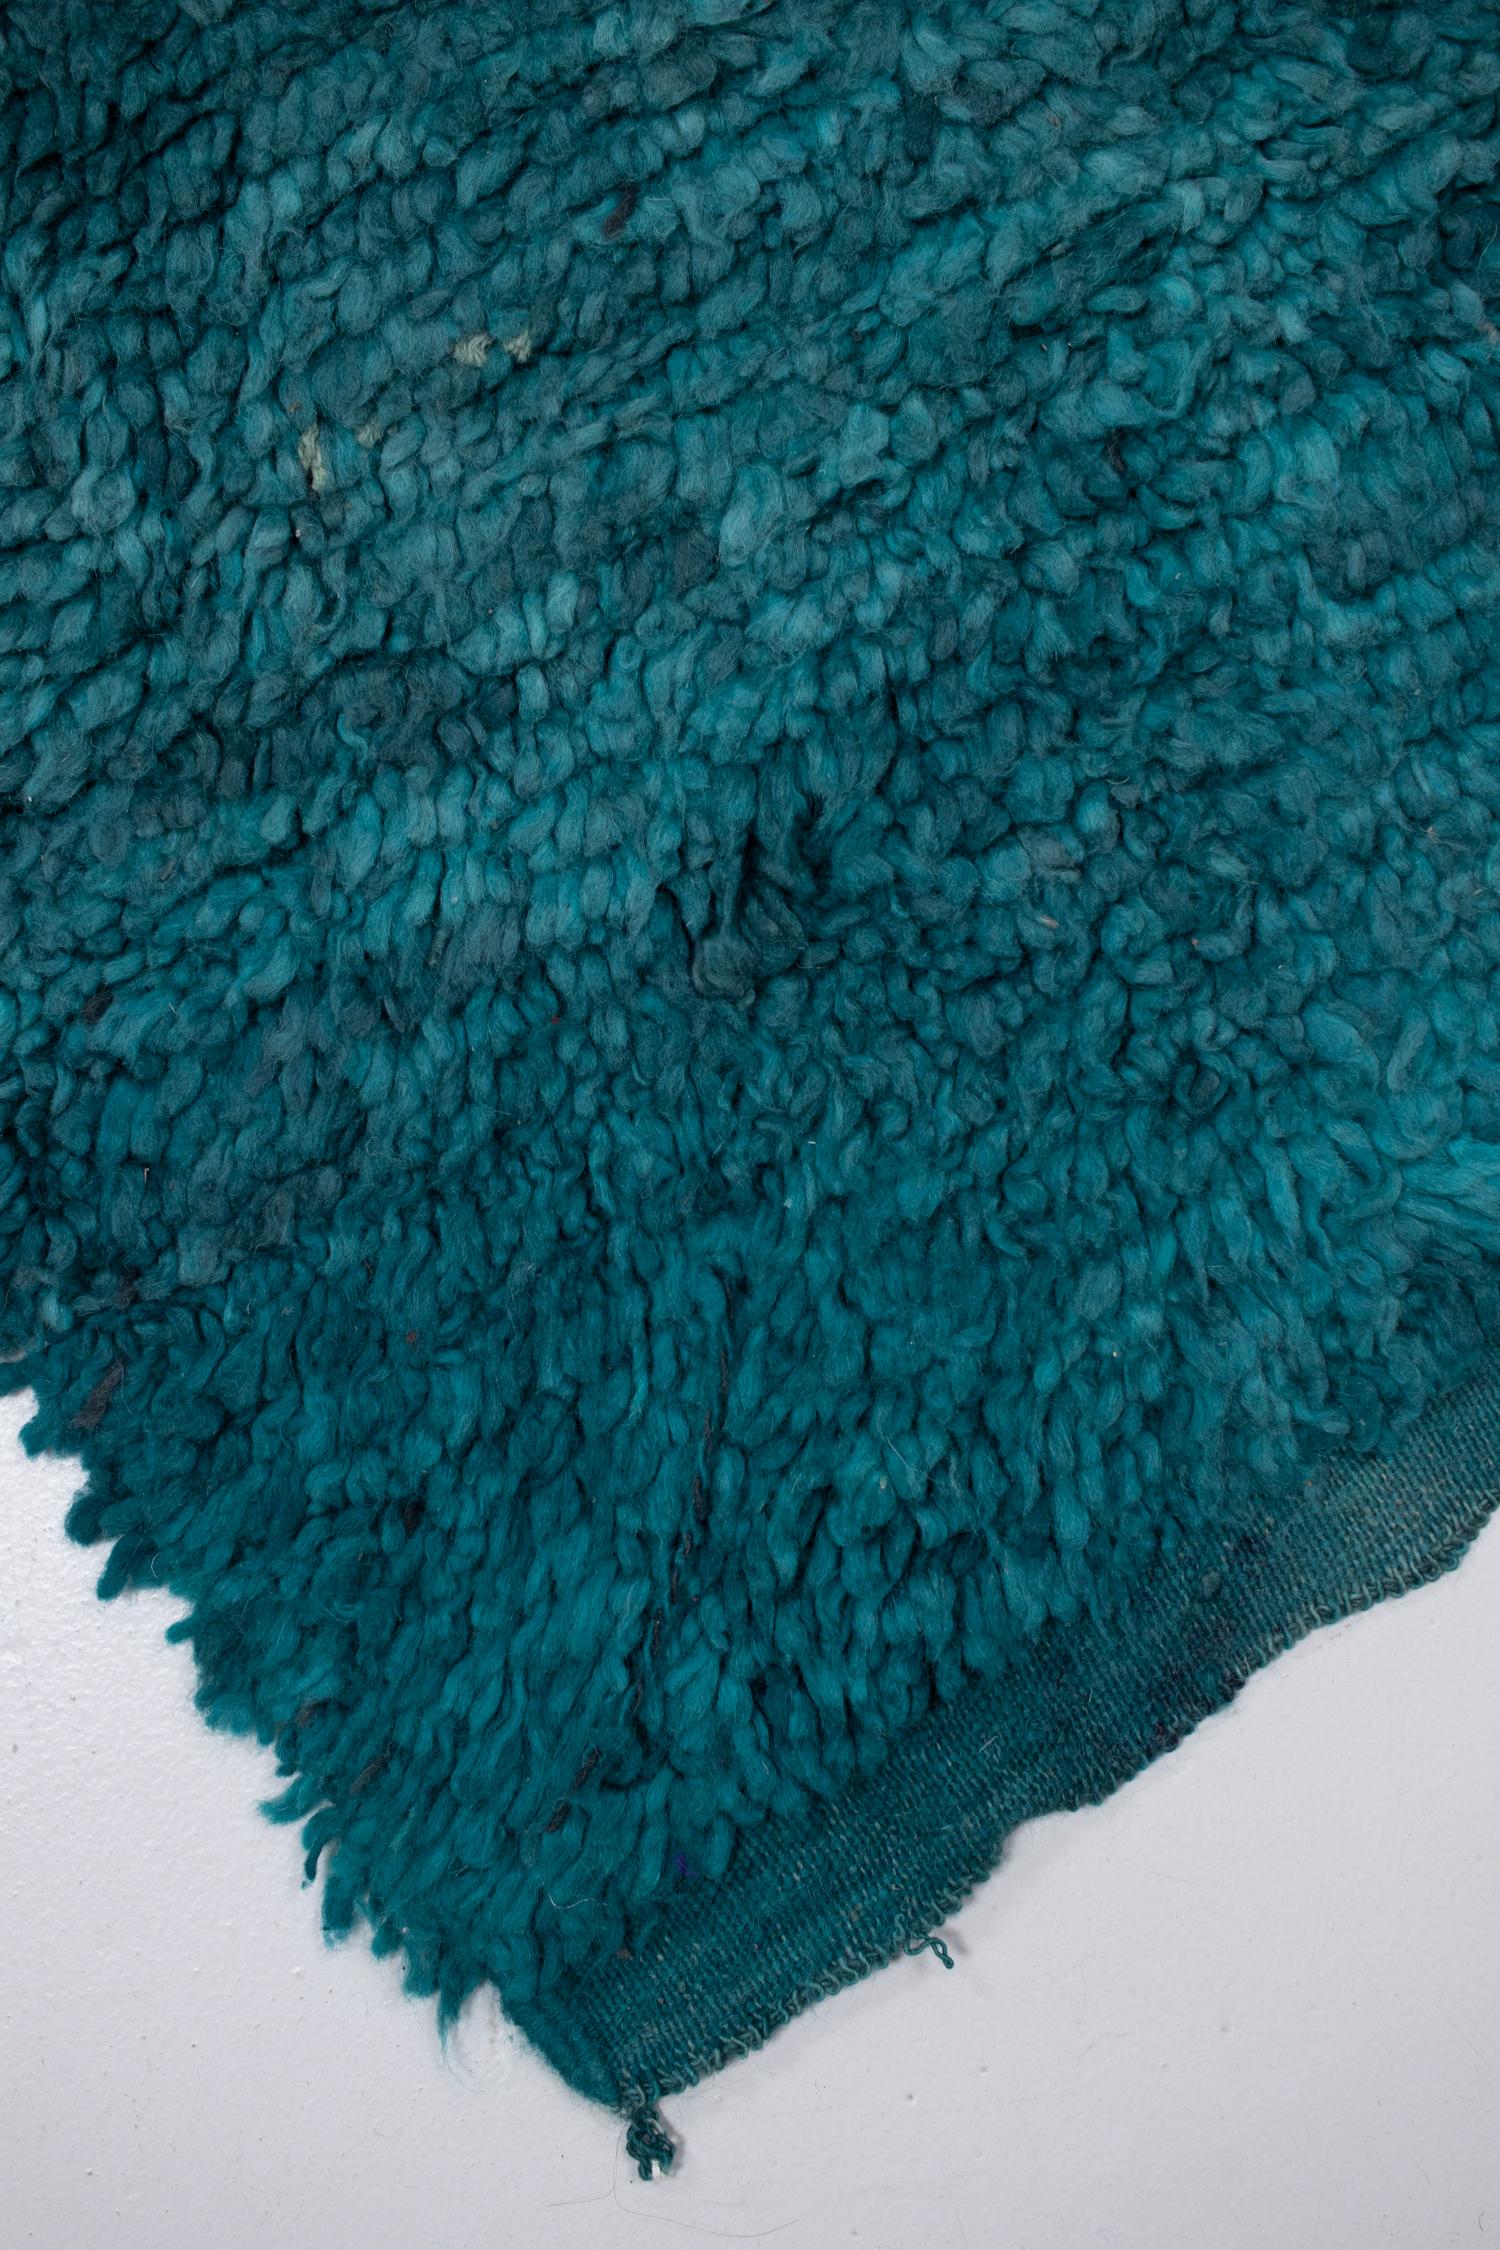 Vintage Turquoise Beni M'guild Rug In Good Condition For Sale In West Palm Beach, FL